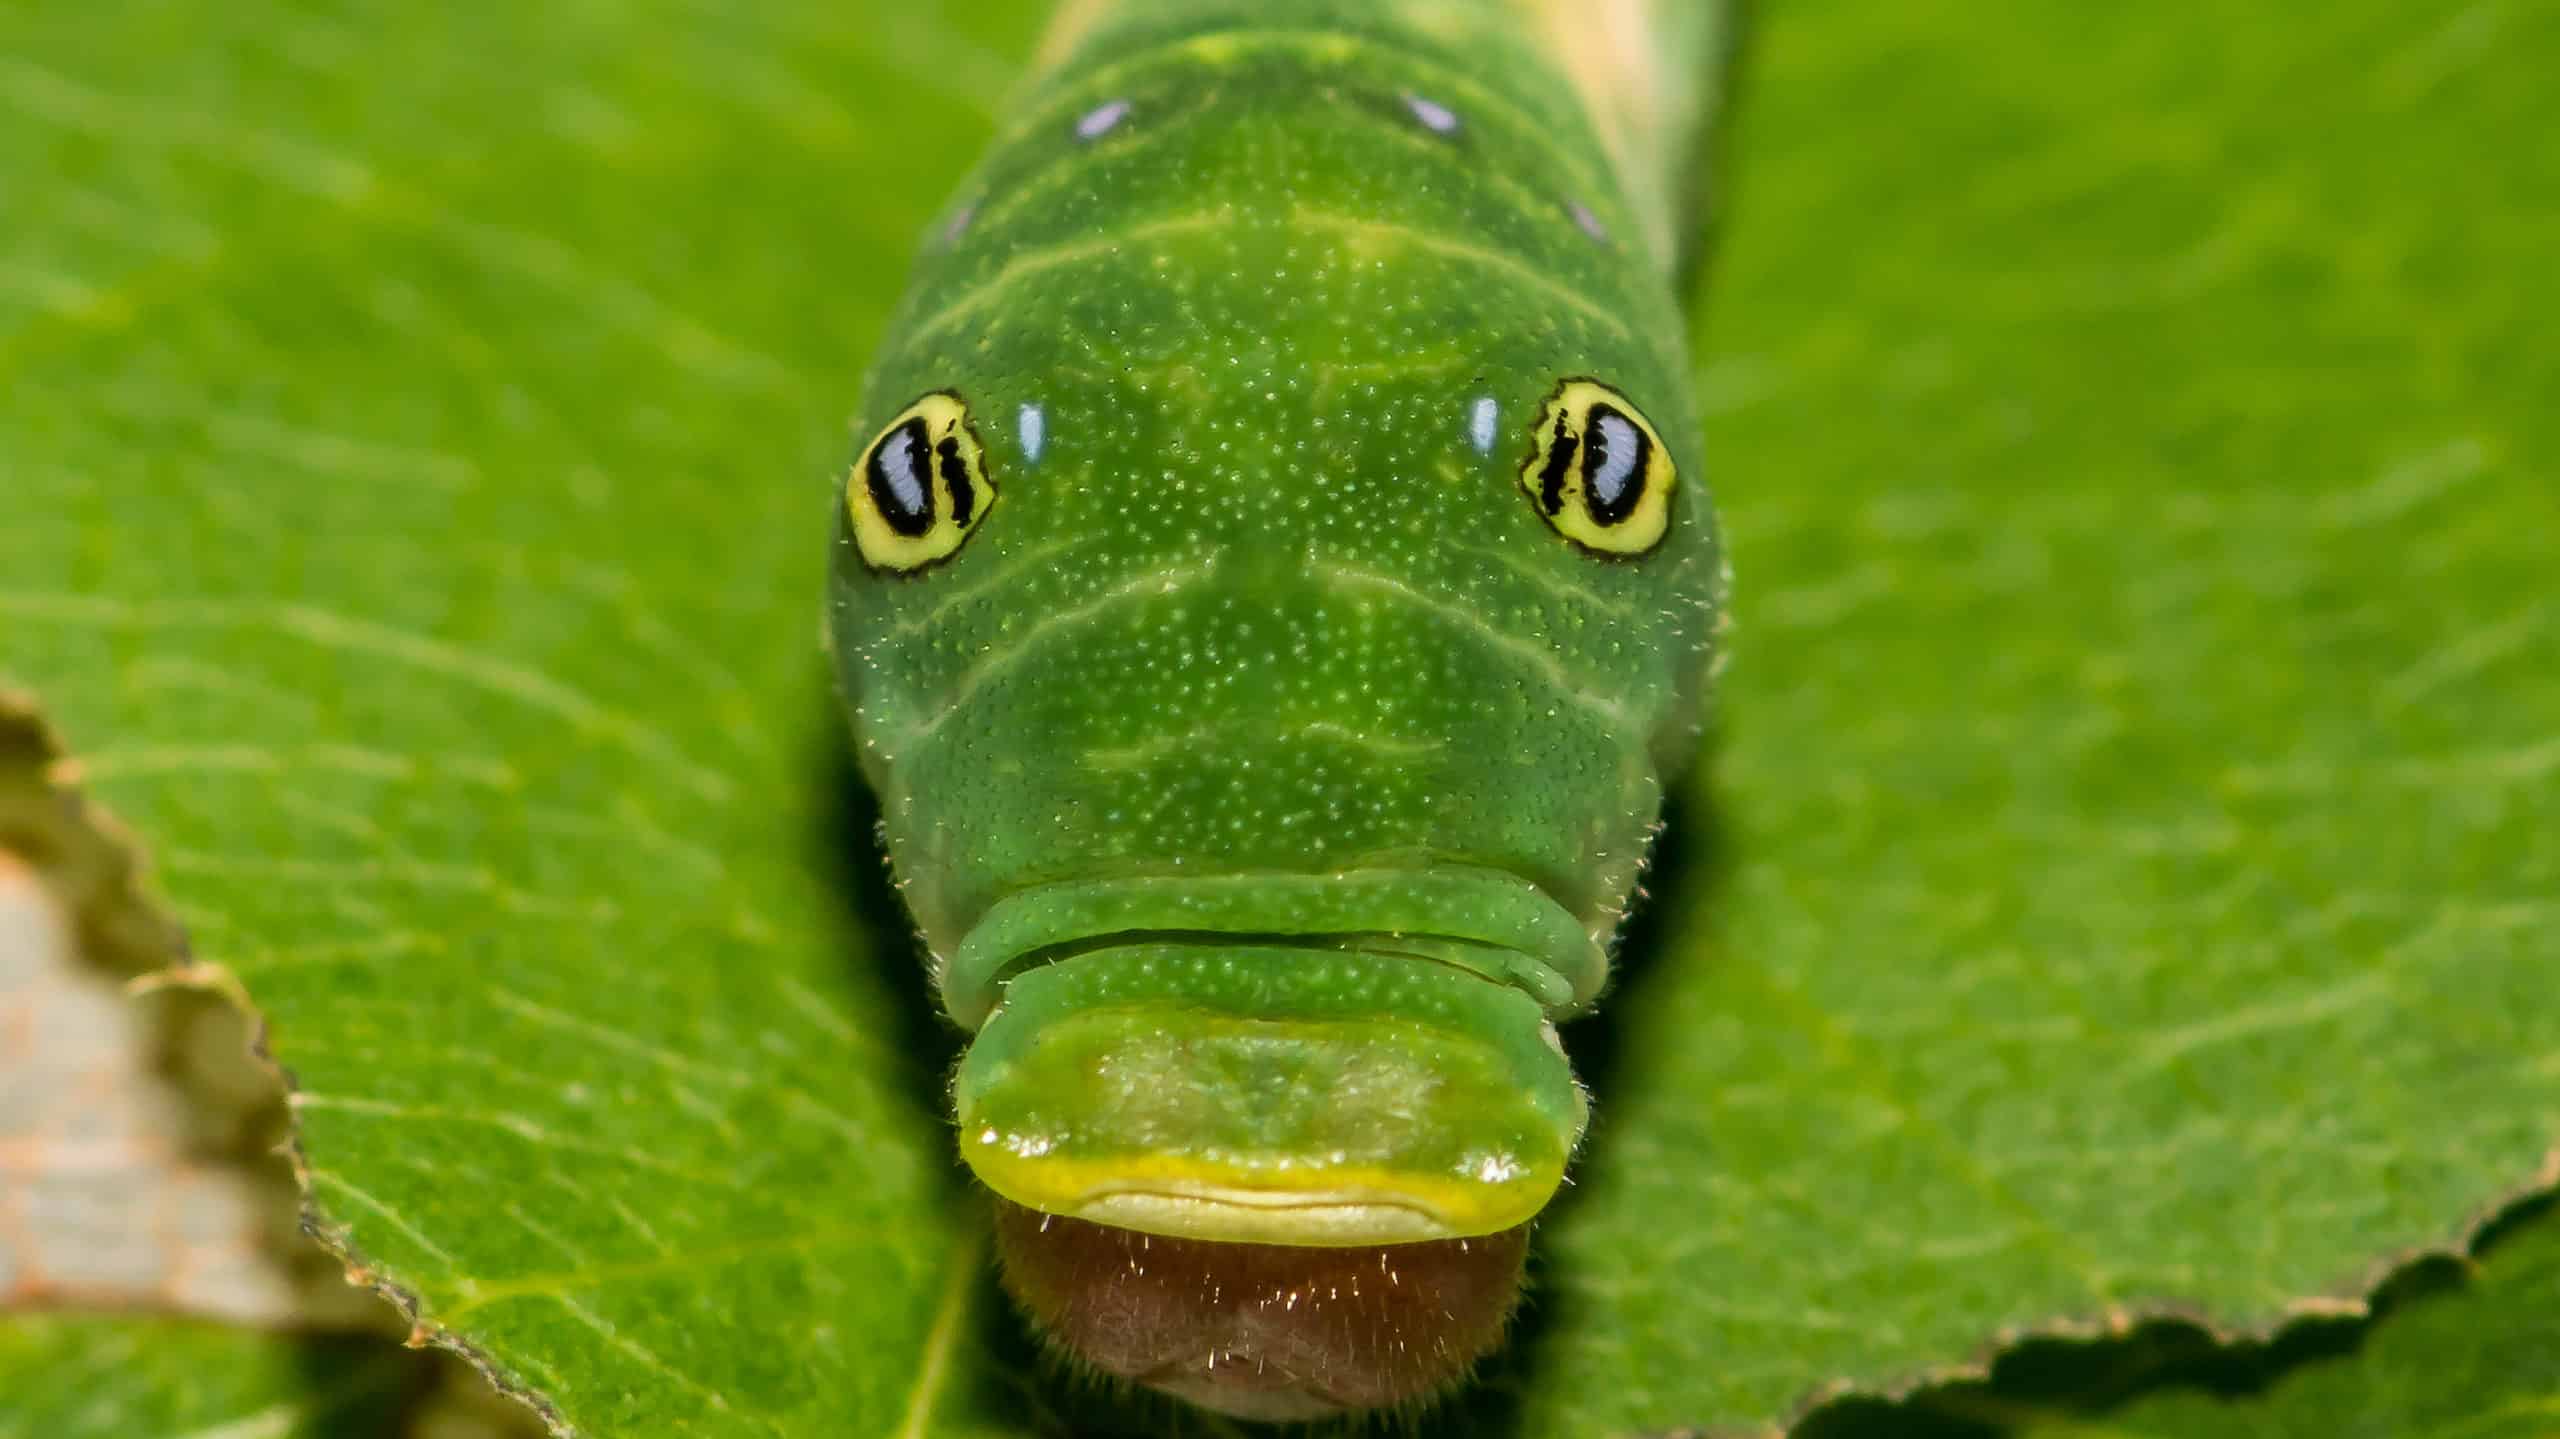 A photograph of an Eastern tiger swallowtail caterpillar facing the camera. the caterpillar is green on a green leaf. It has two ey spots and a big mouth.